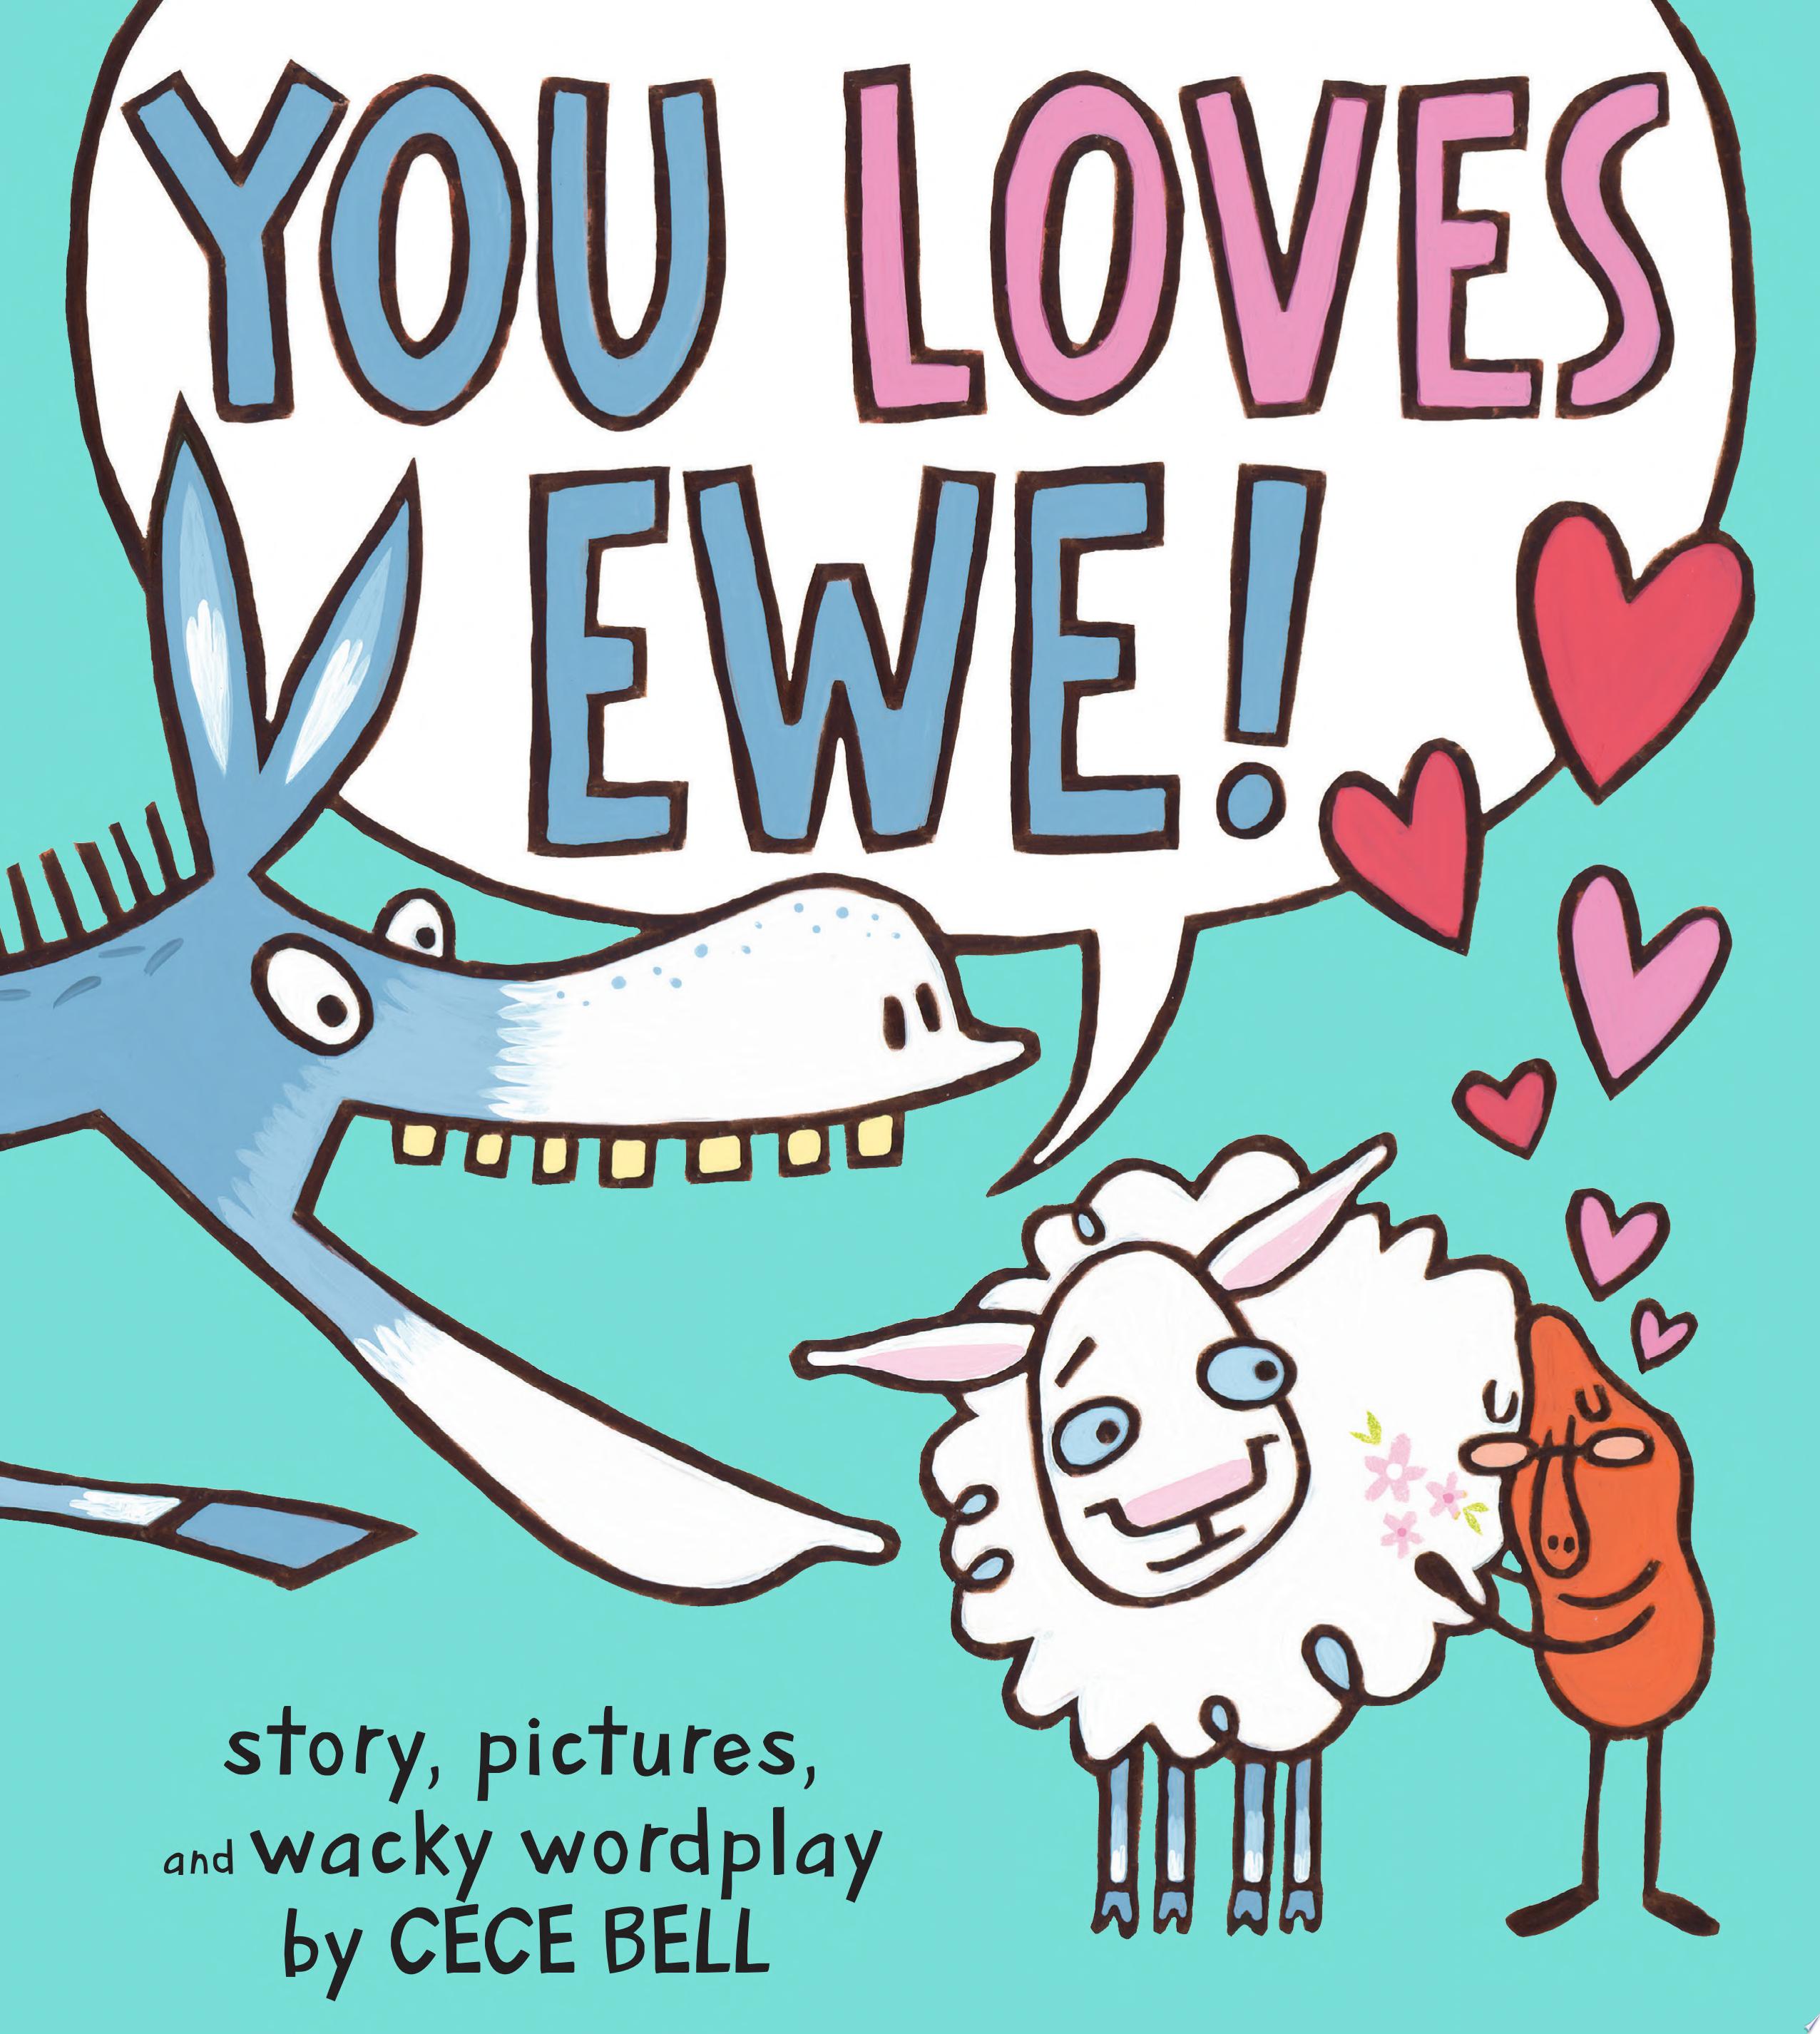 Image for "You Loves Ewe!"